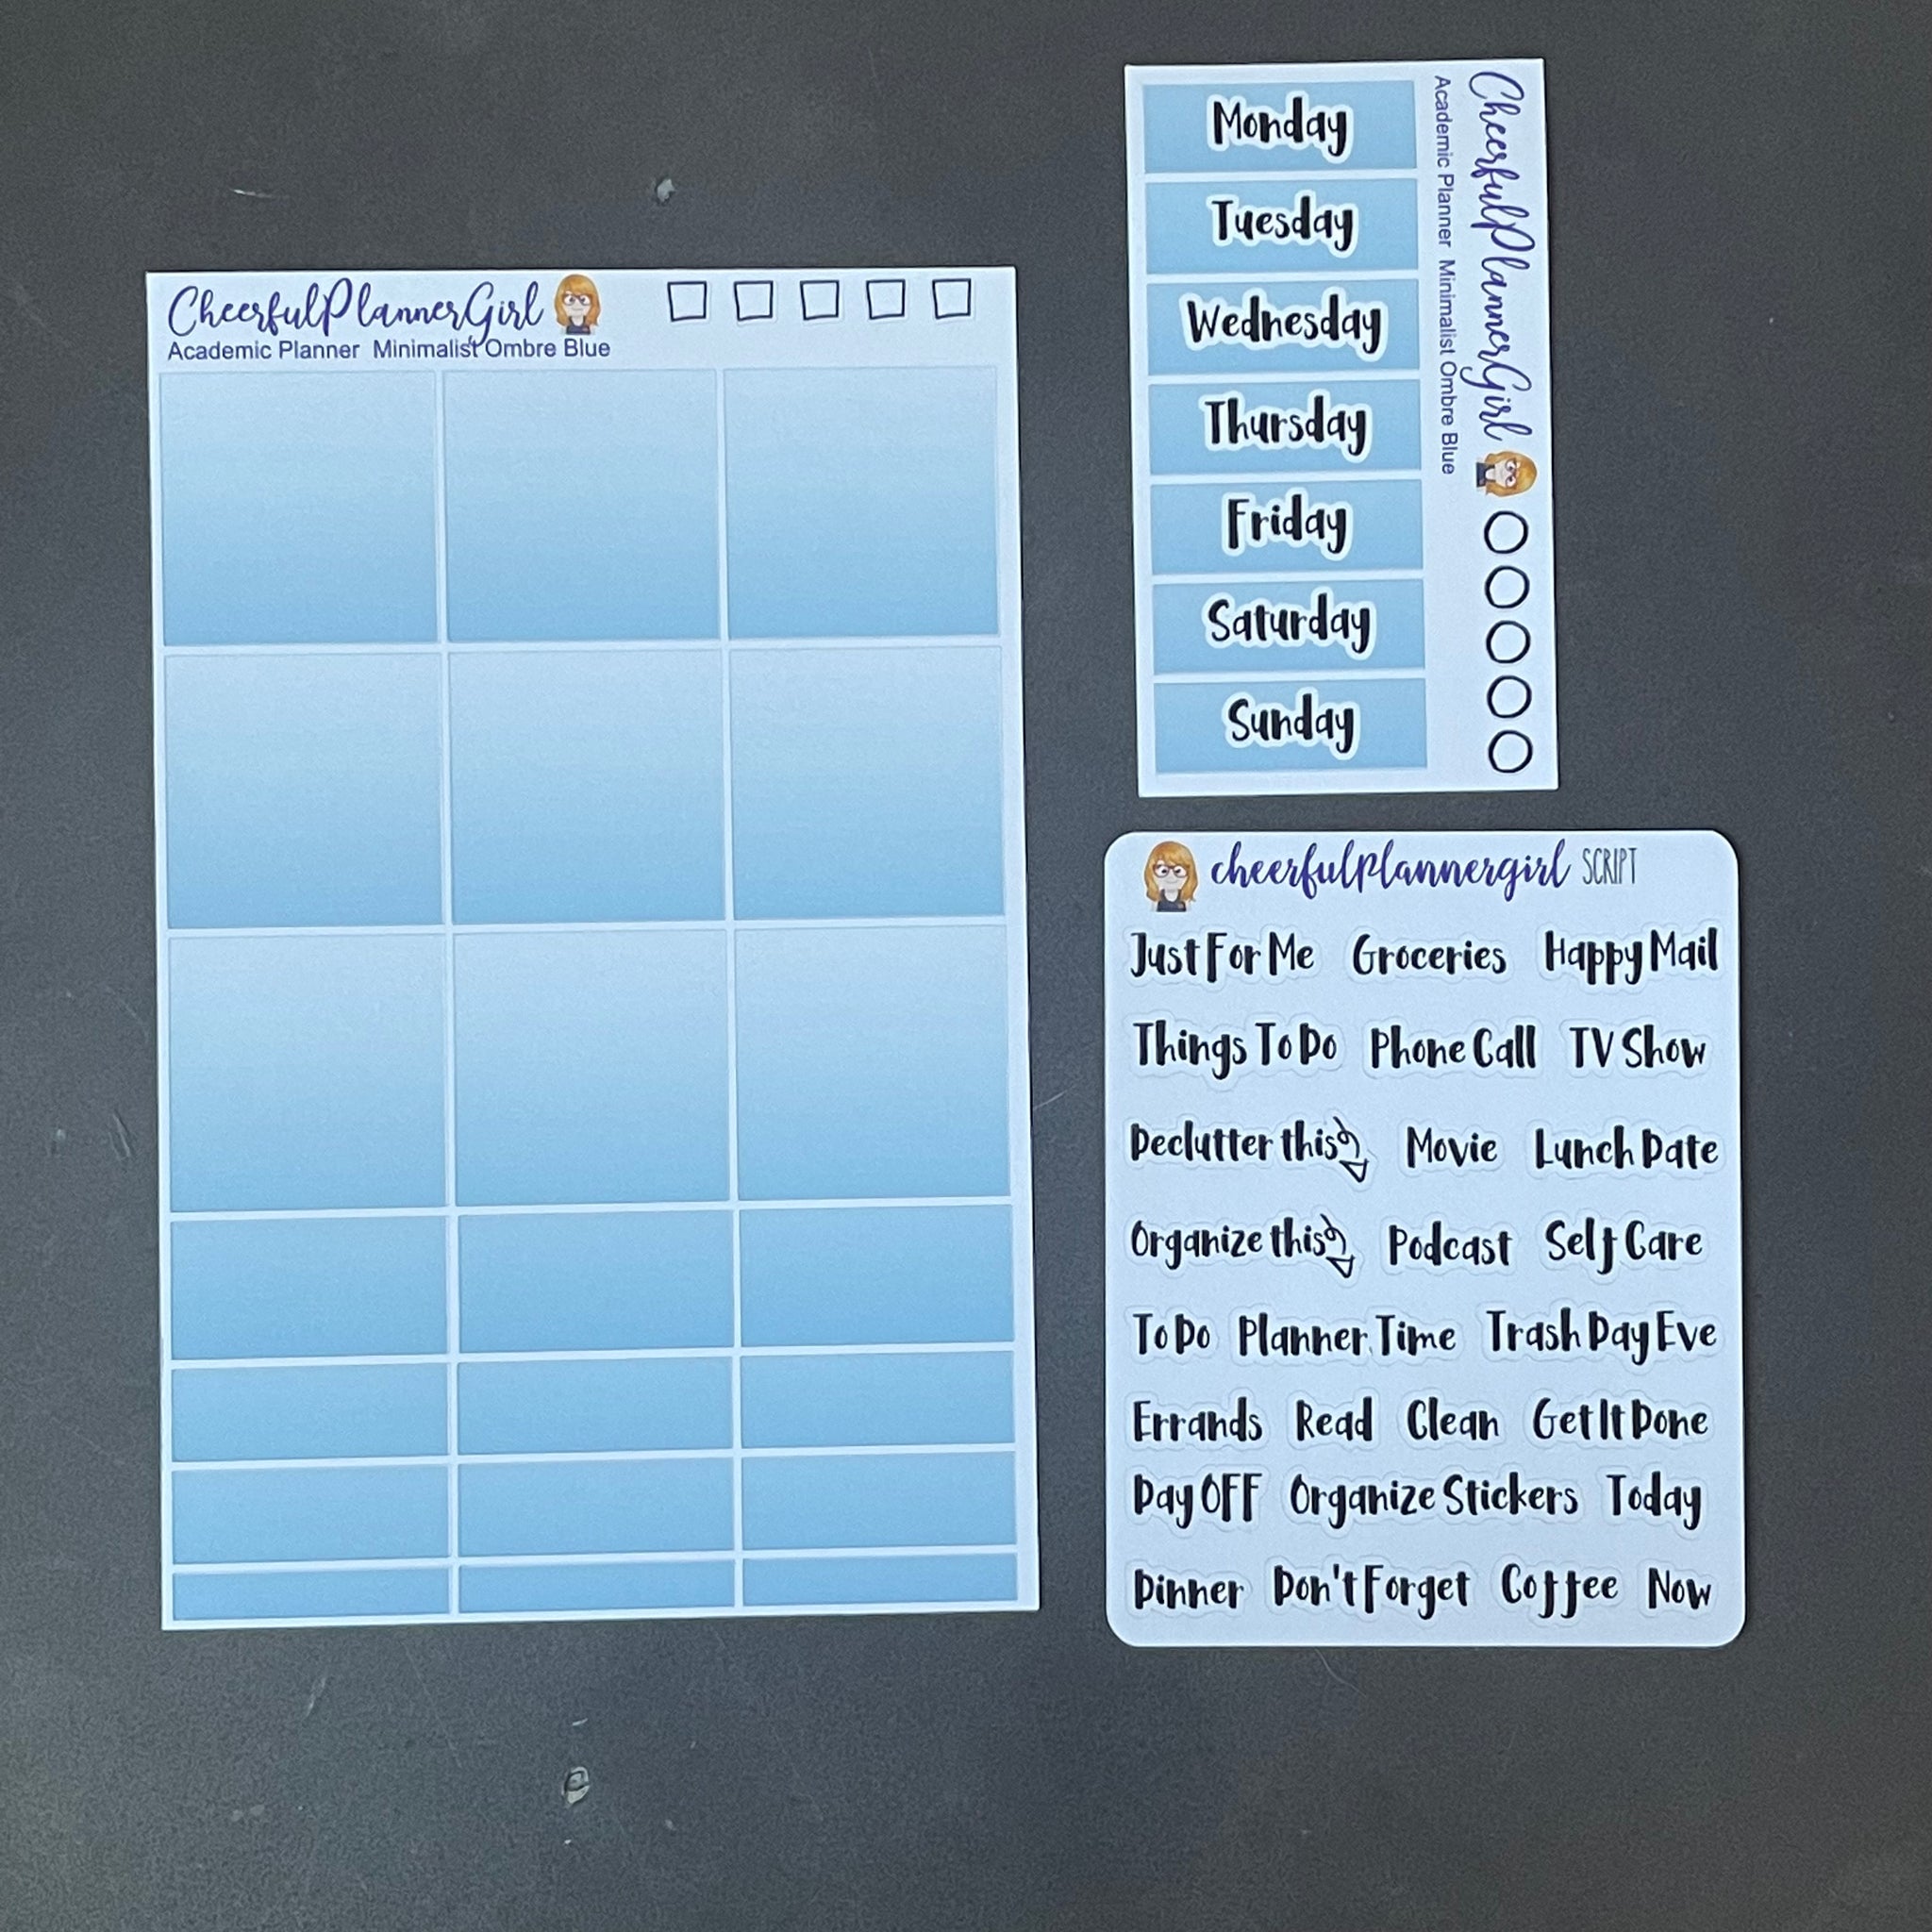 Minimalist Ombre Blue for the Academic Planner Weekly Layout